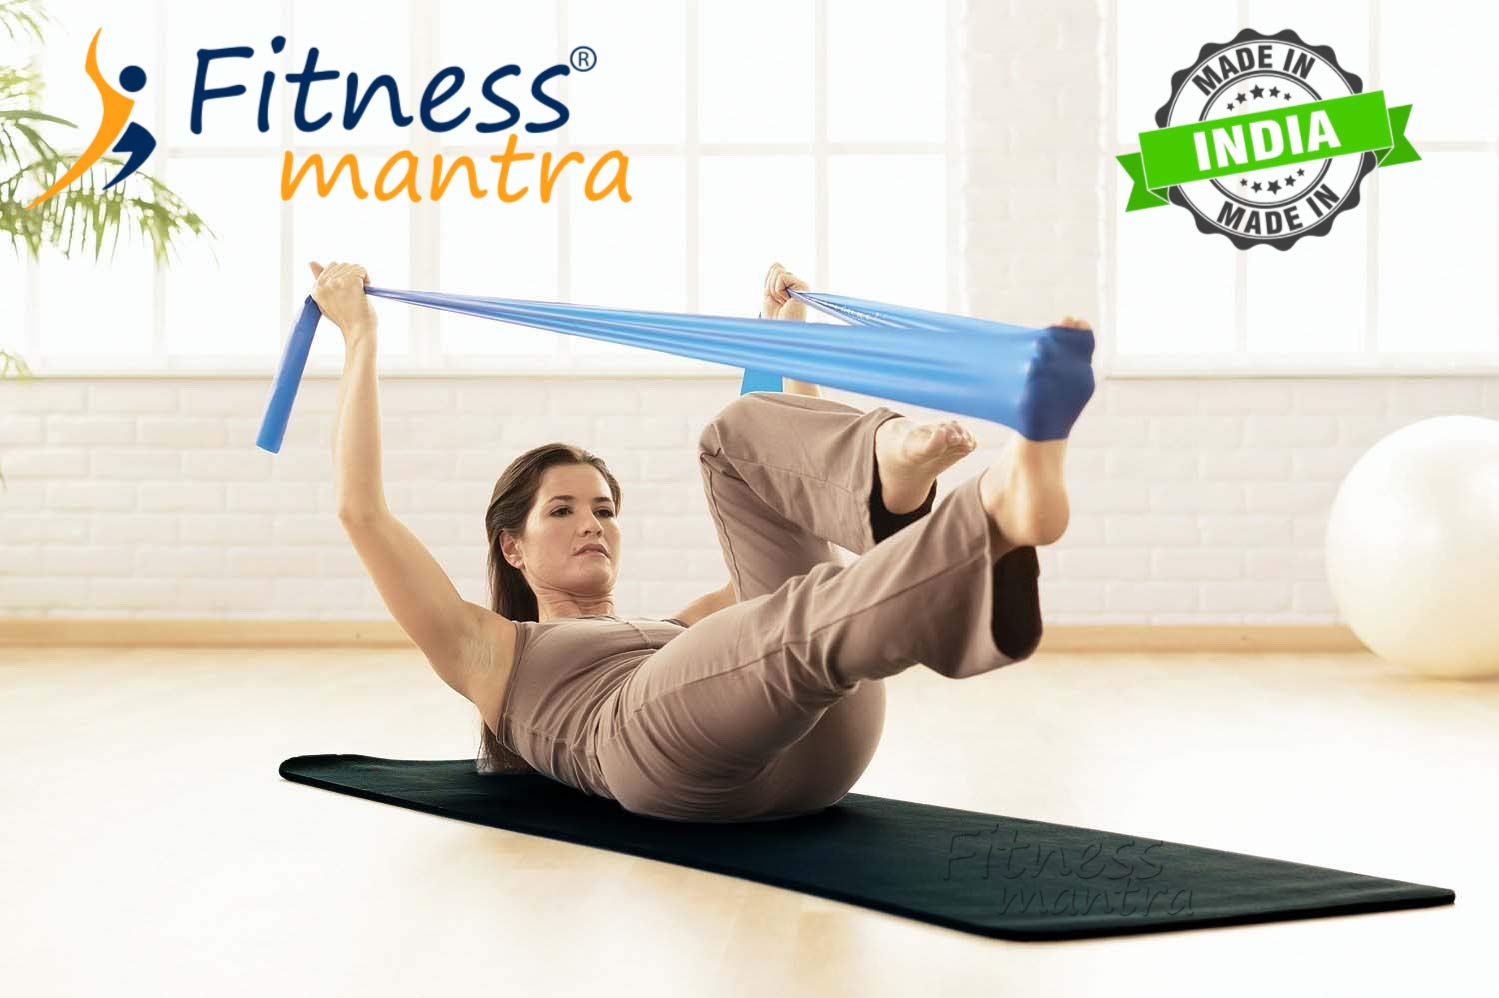 Fitness Mantra Yoga Mat for Gym Workout and Yoga Exercise